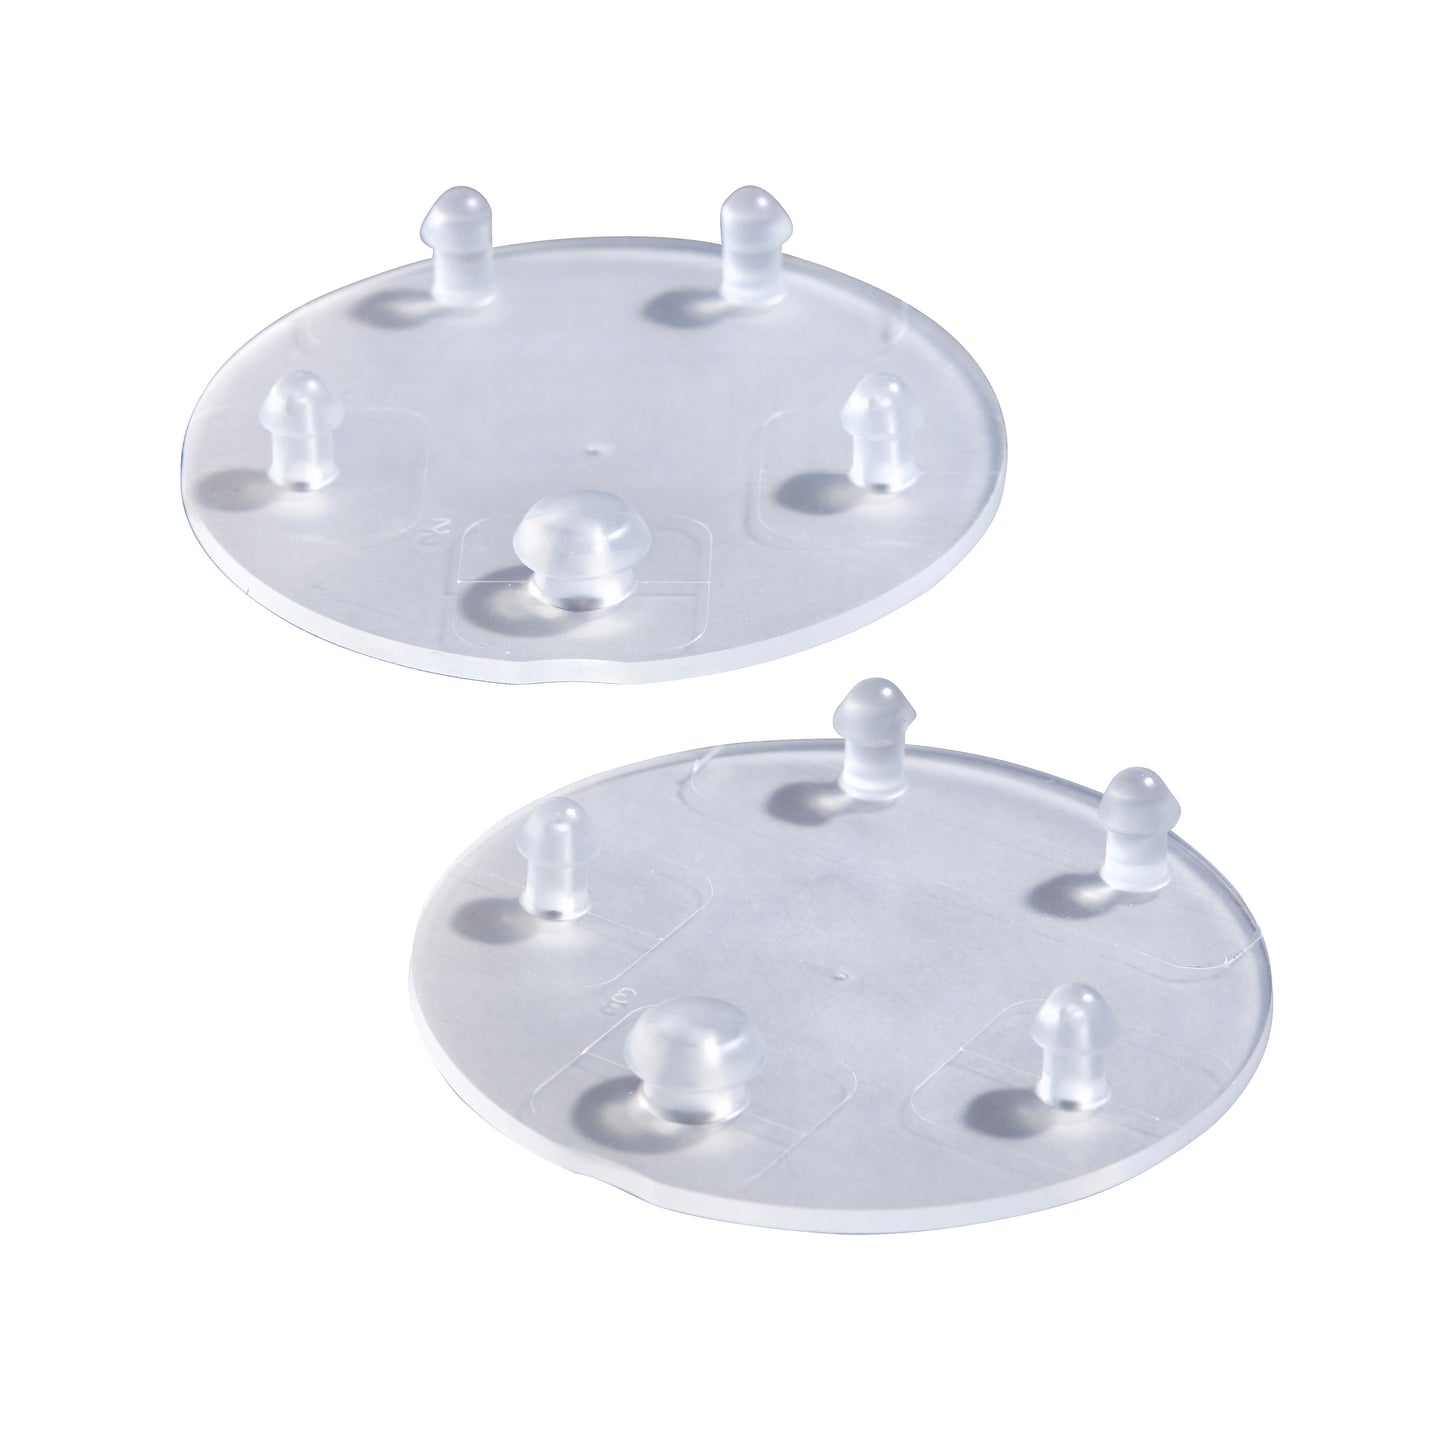 7381424-100.0070A - Vormax Silicone Flappers